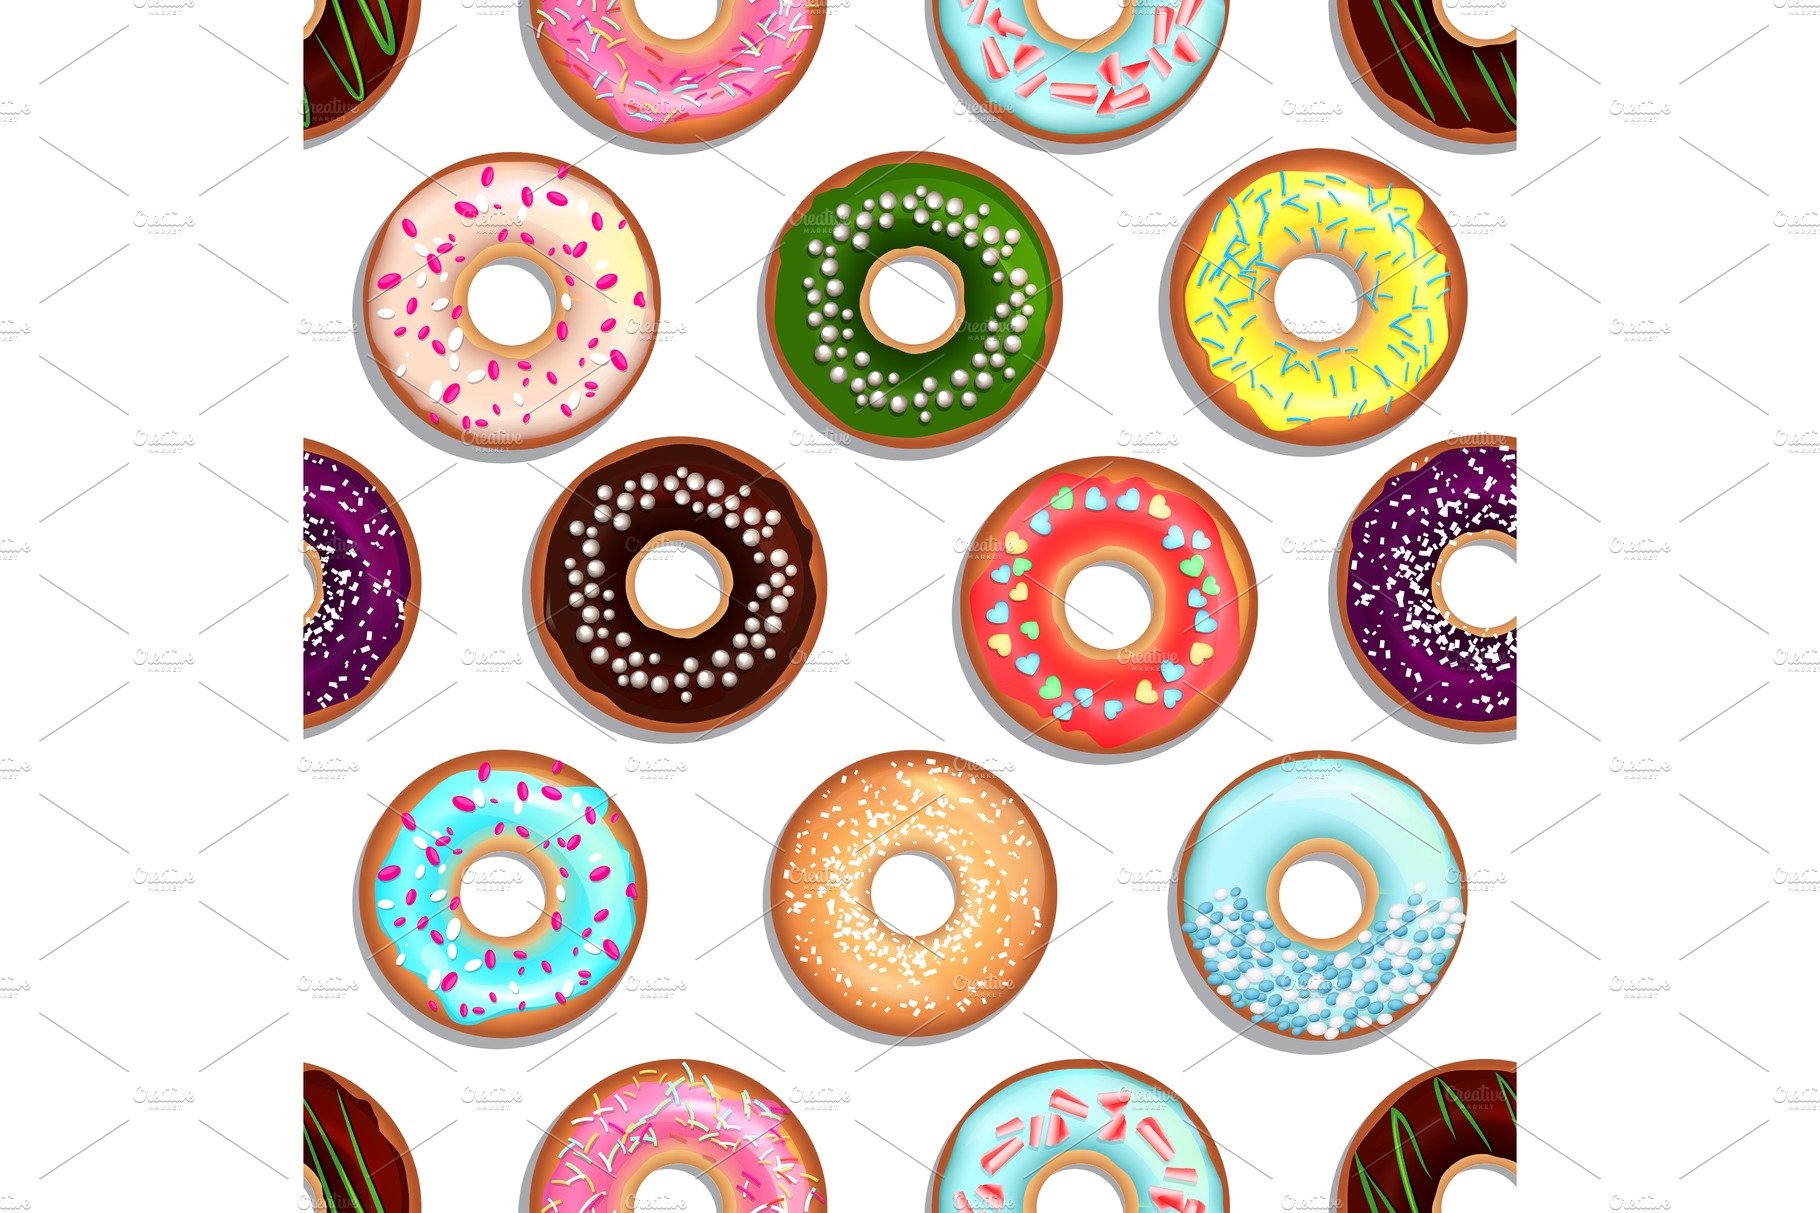 Vector seamless pattern with tasty foods. Desserts with glaze donuts and cakes cover image.